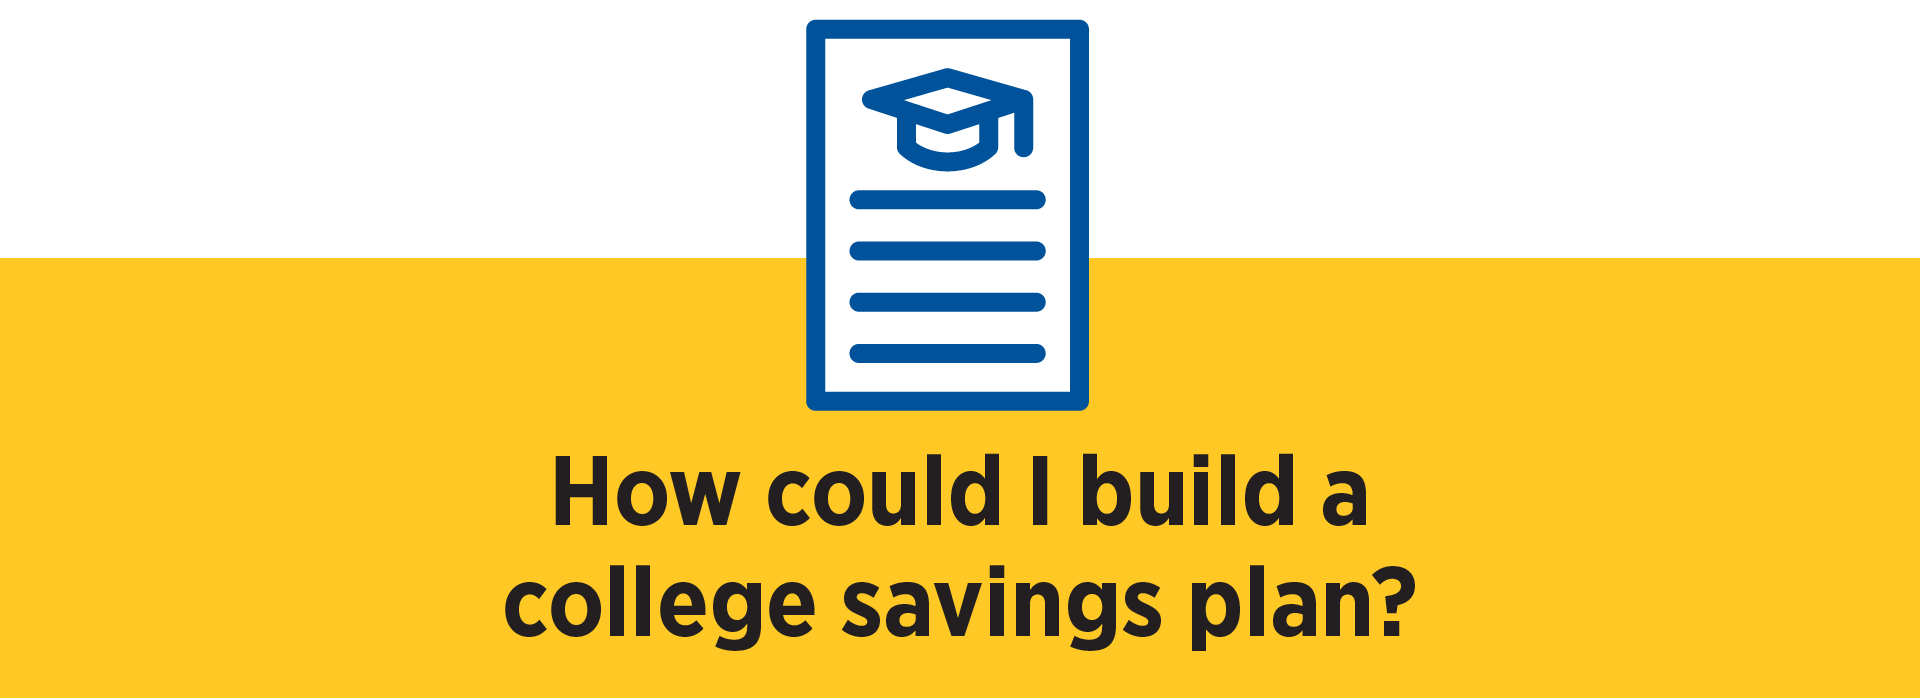 Savings Calculator Icon How could I build a college savings plan